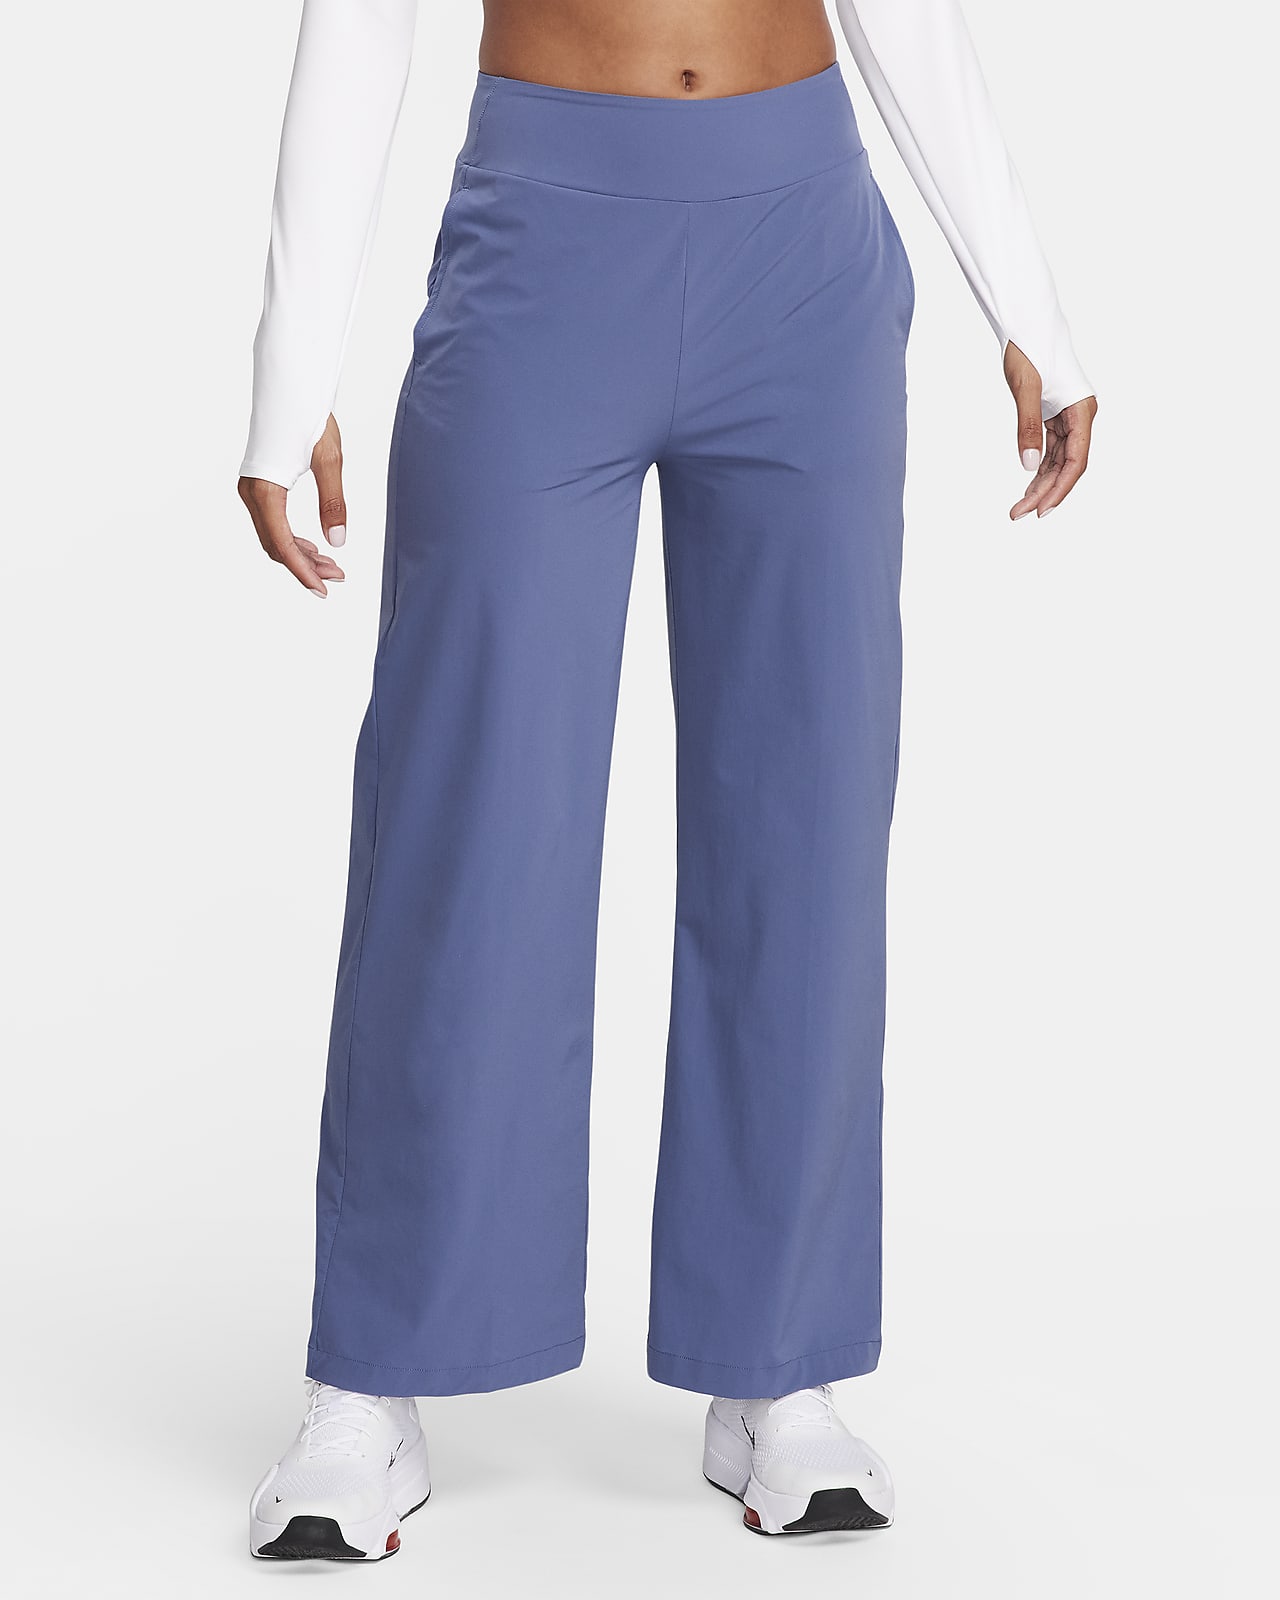 Women's Dri-FIT Academy Pant from Nike